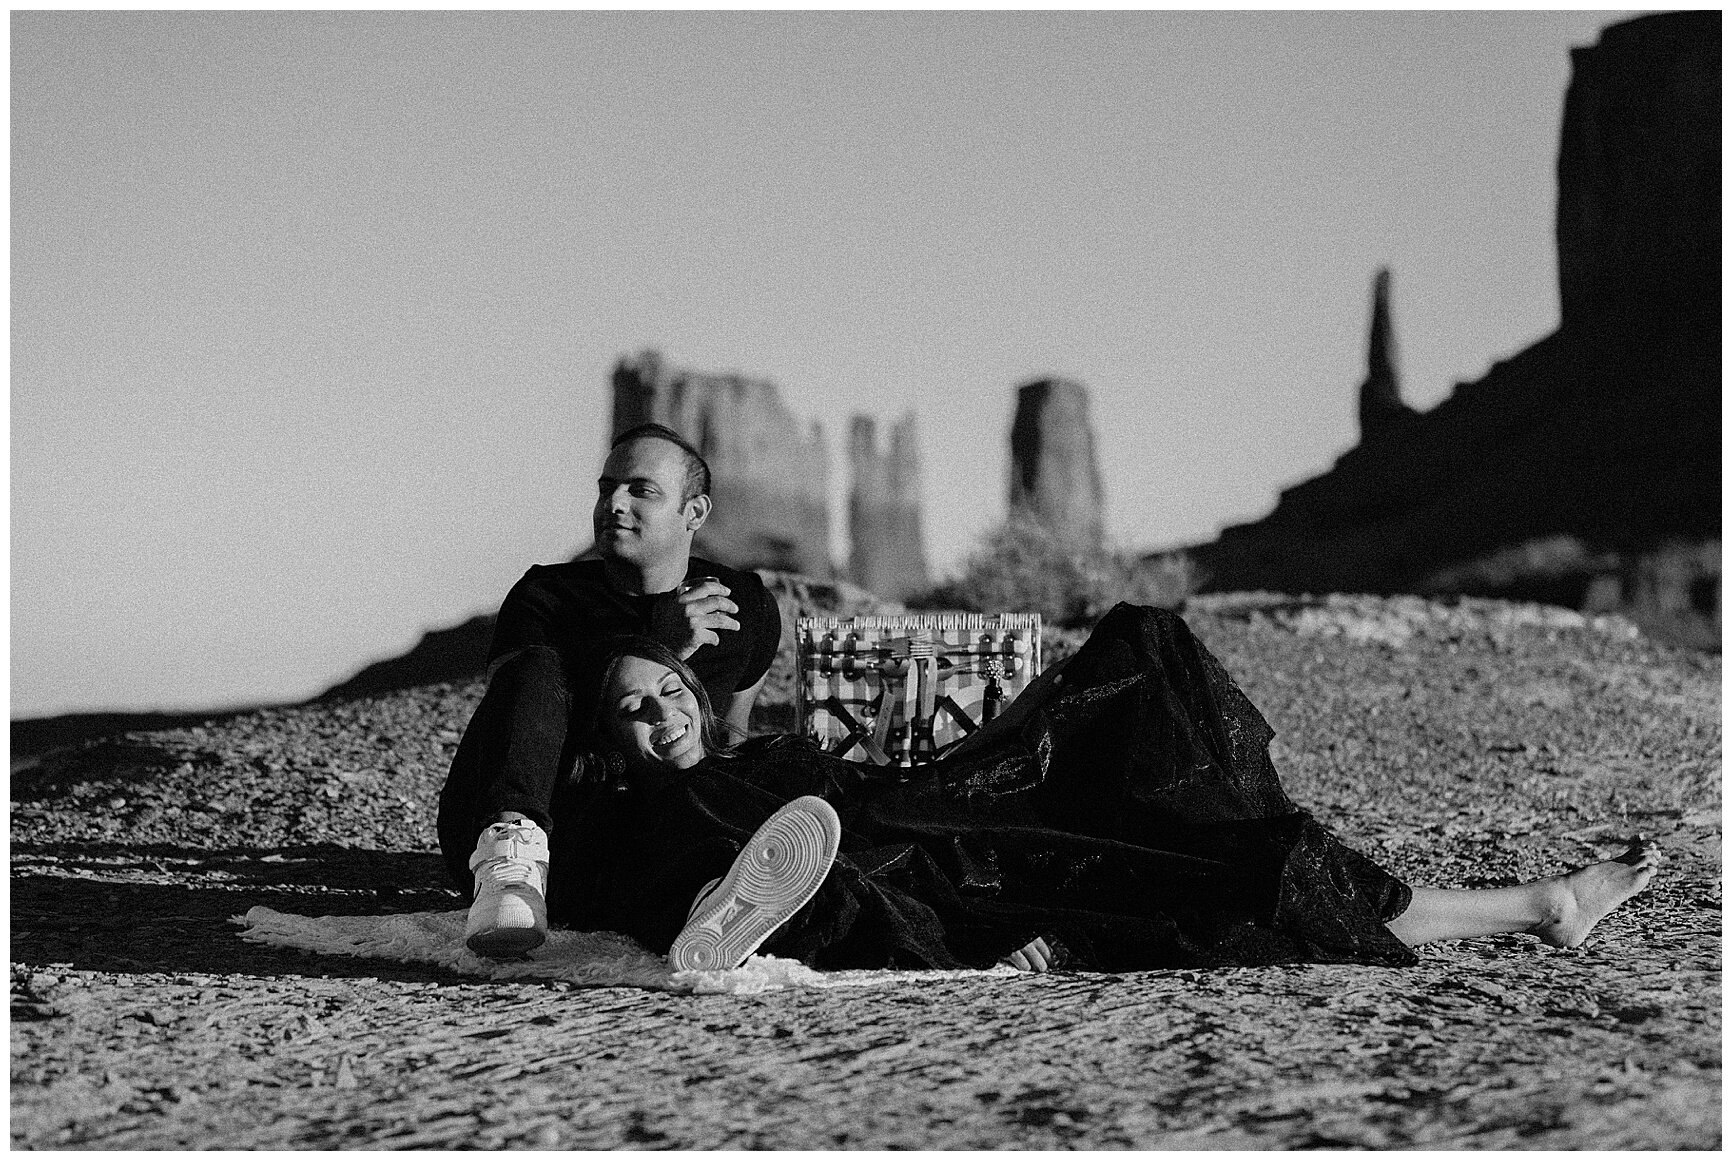 engaged couple having a picnic during their photo session in monument valley, arizona